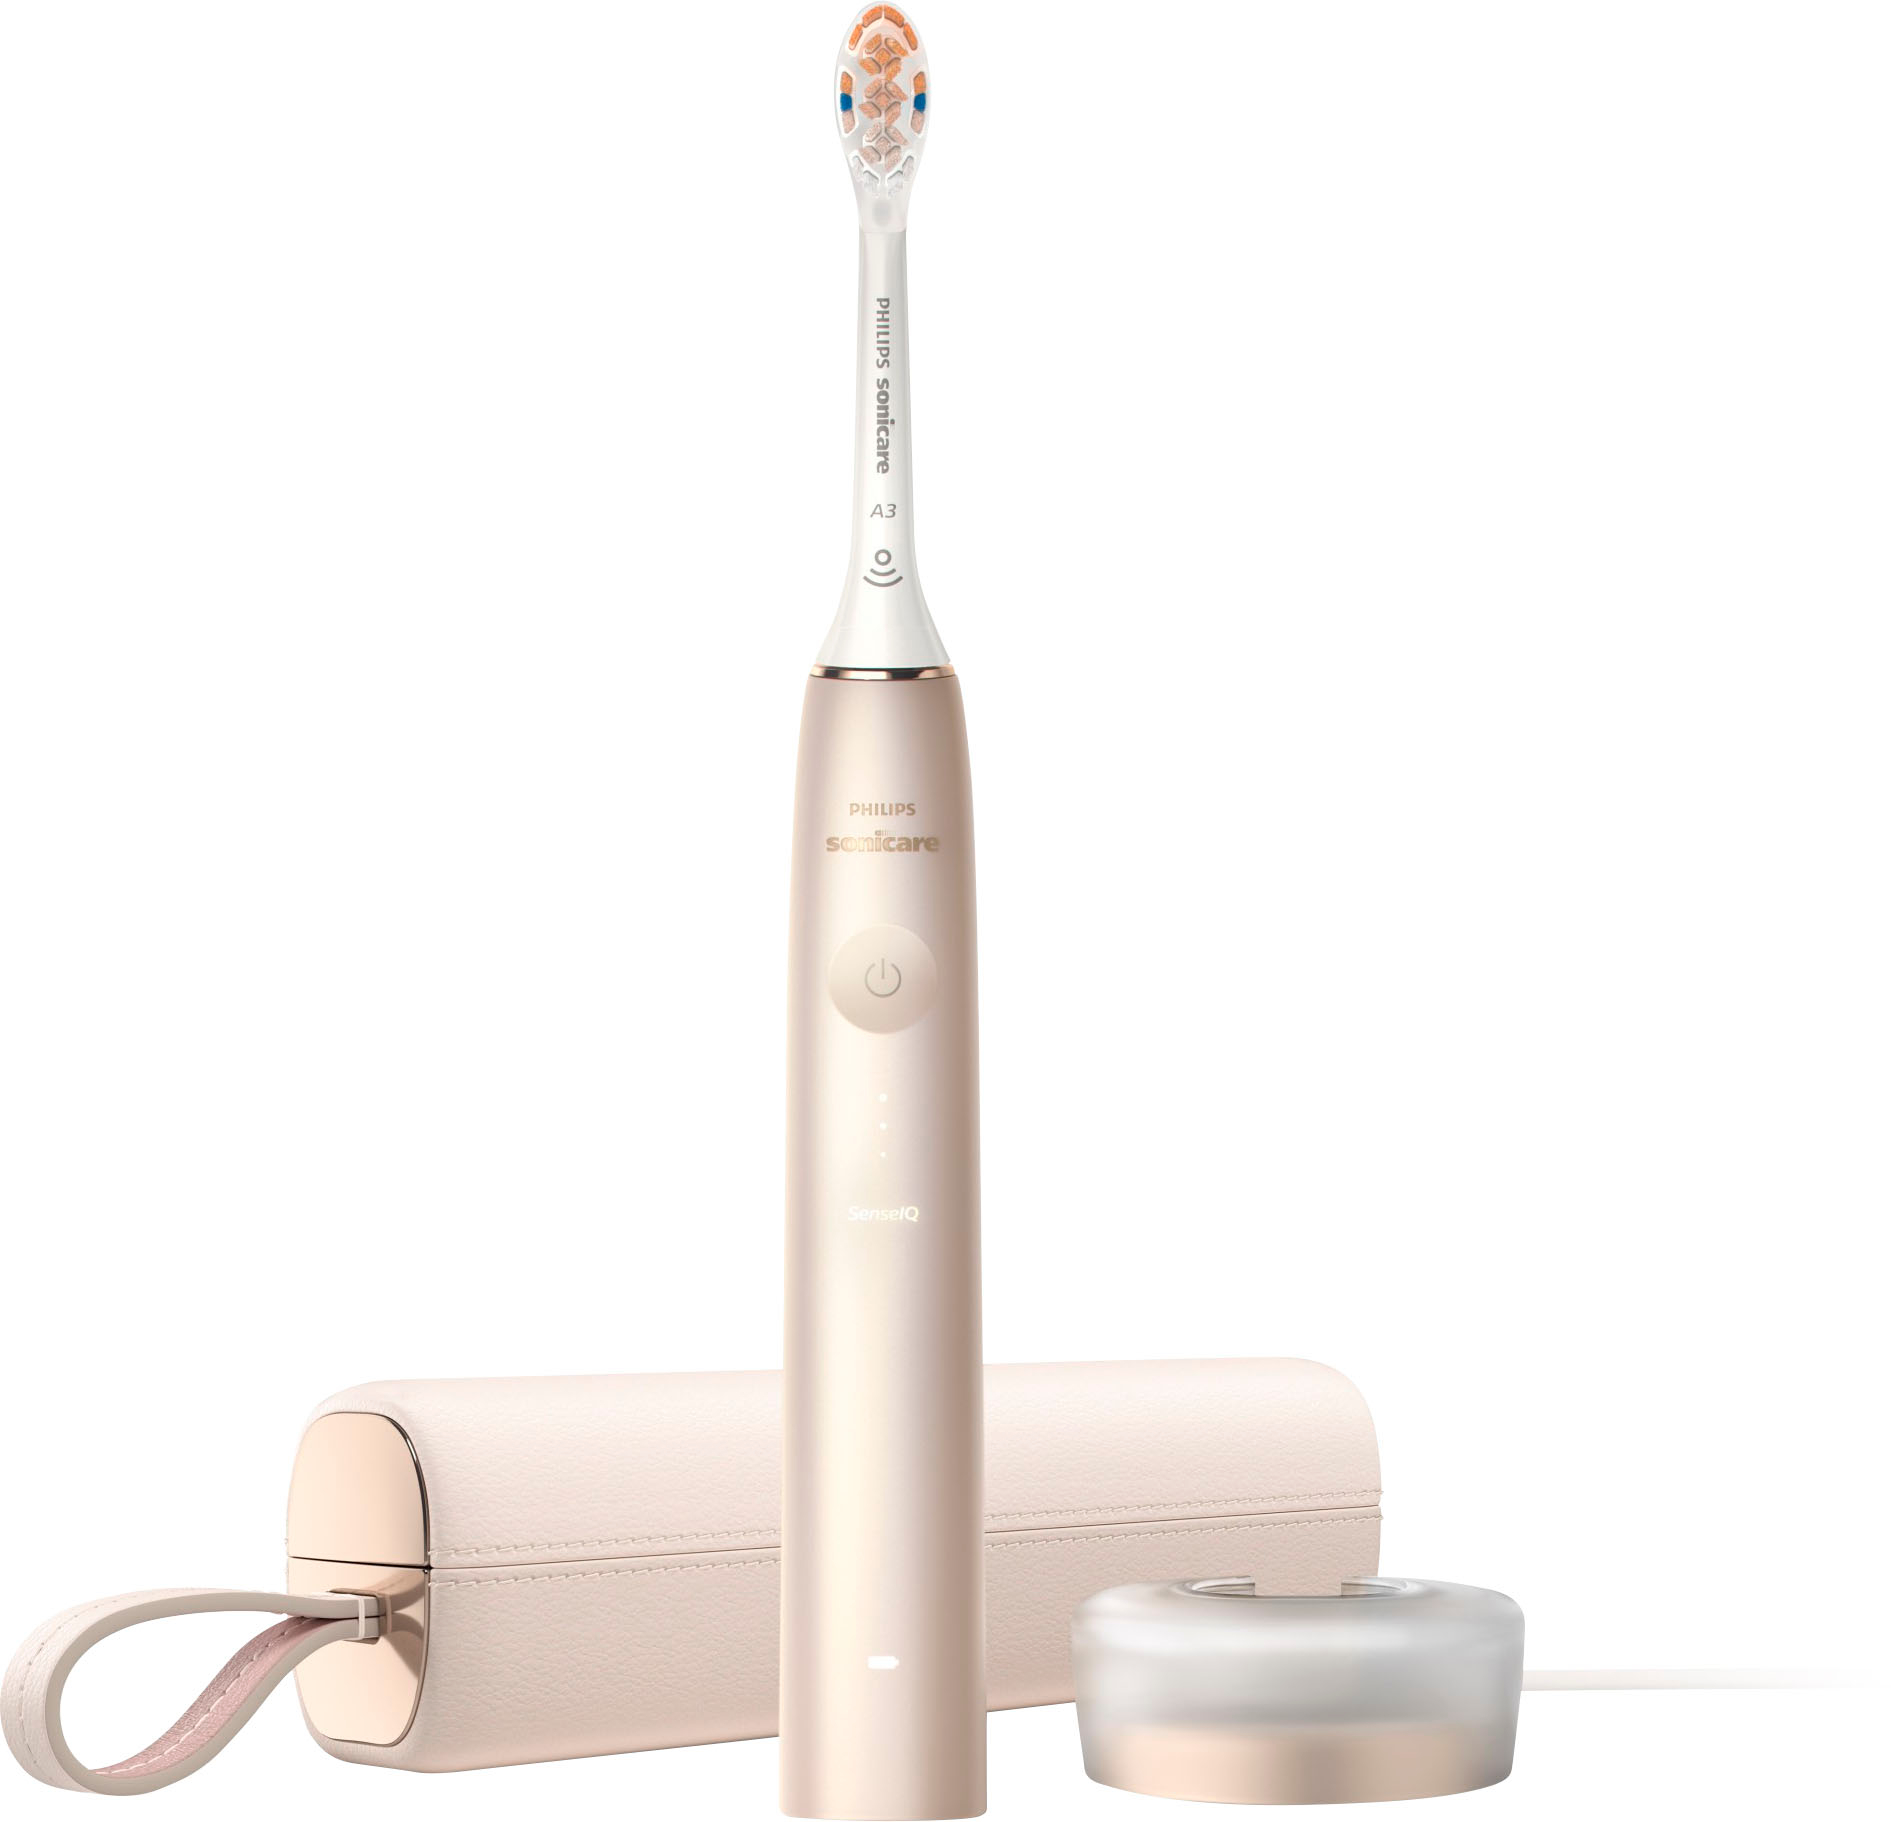 Angle View: Philips Sonicare 9900 Prestige Rechargeable Electric Toothbrush with SenseIQ - Champagne